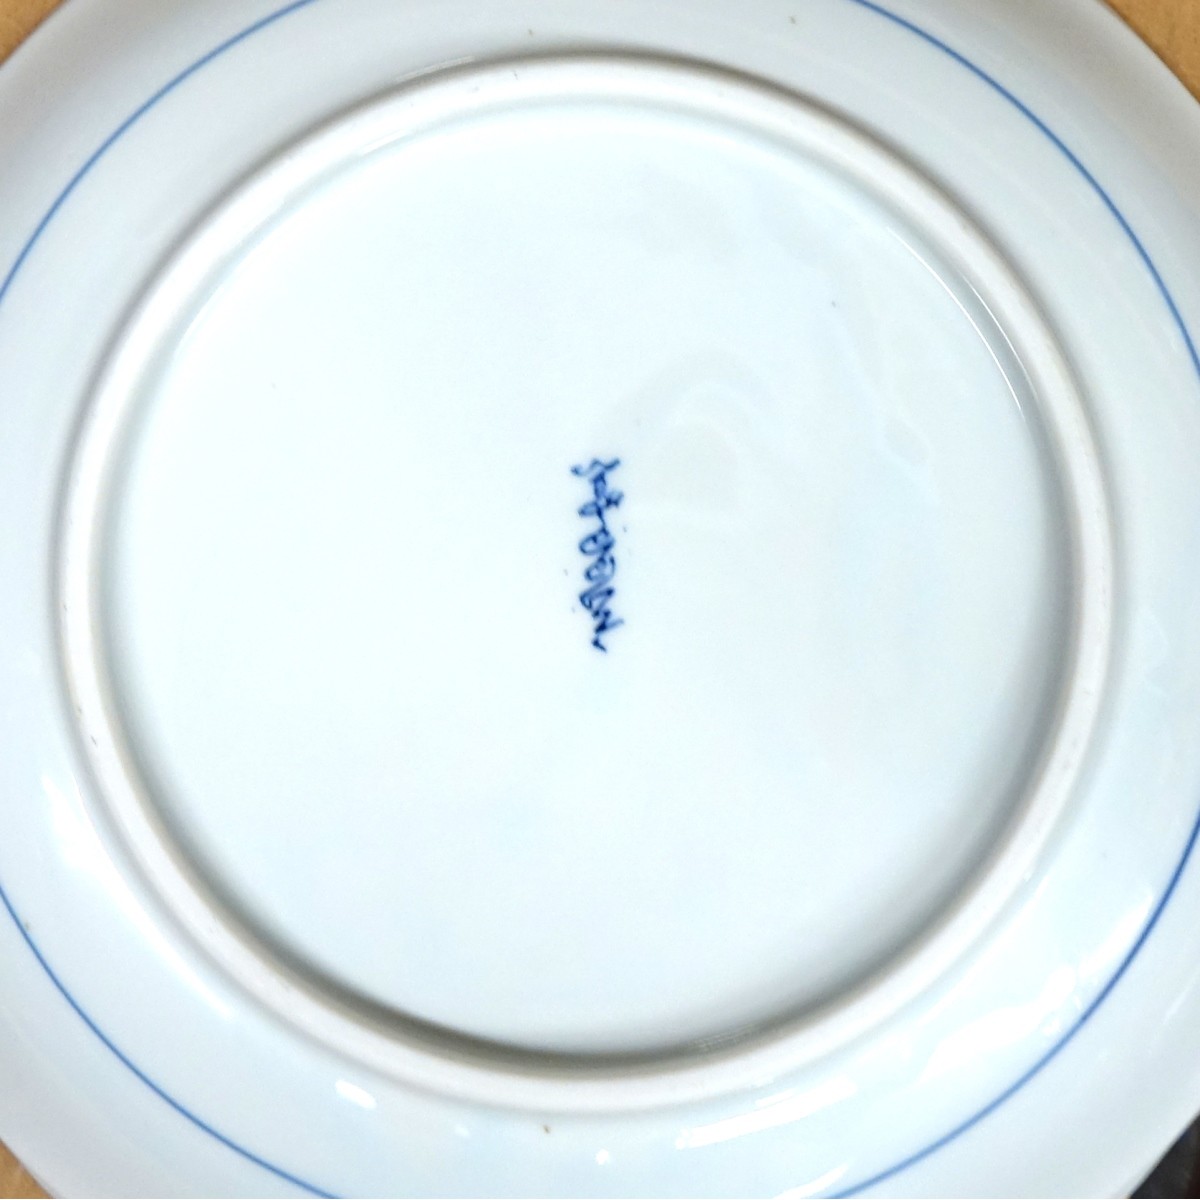 Japanese Blue and White Tableware